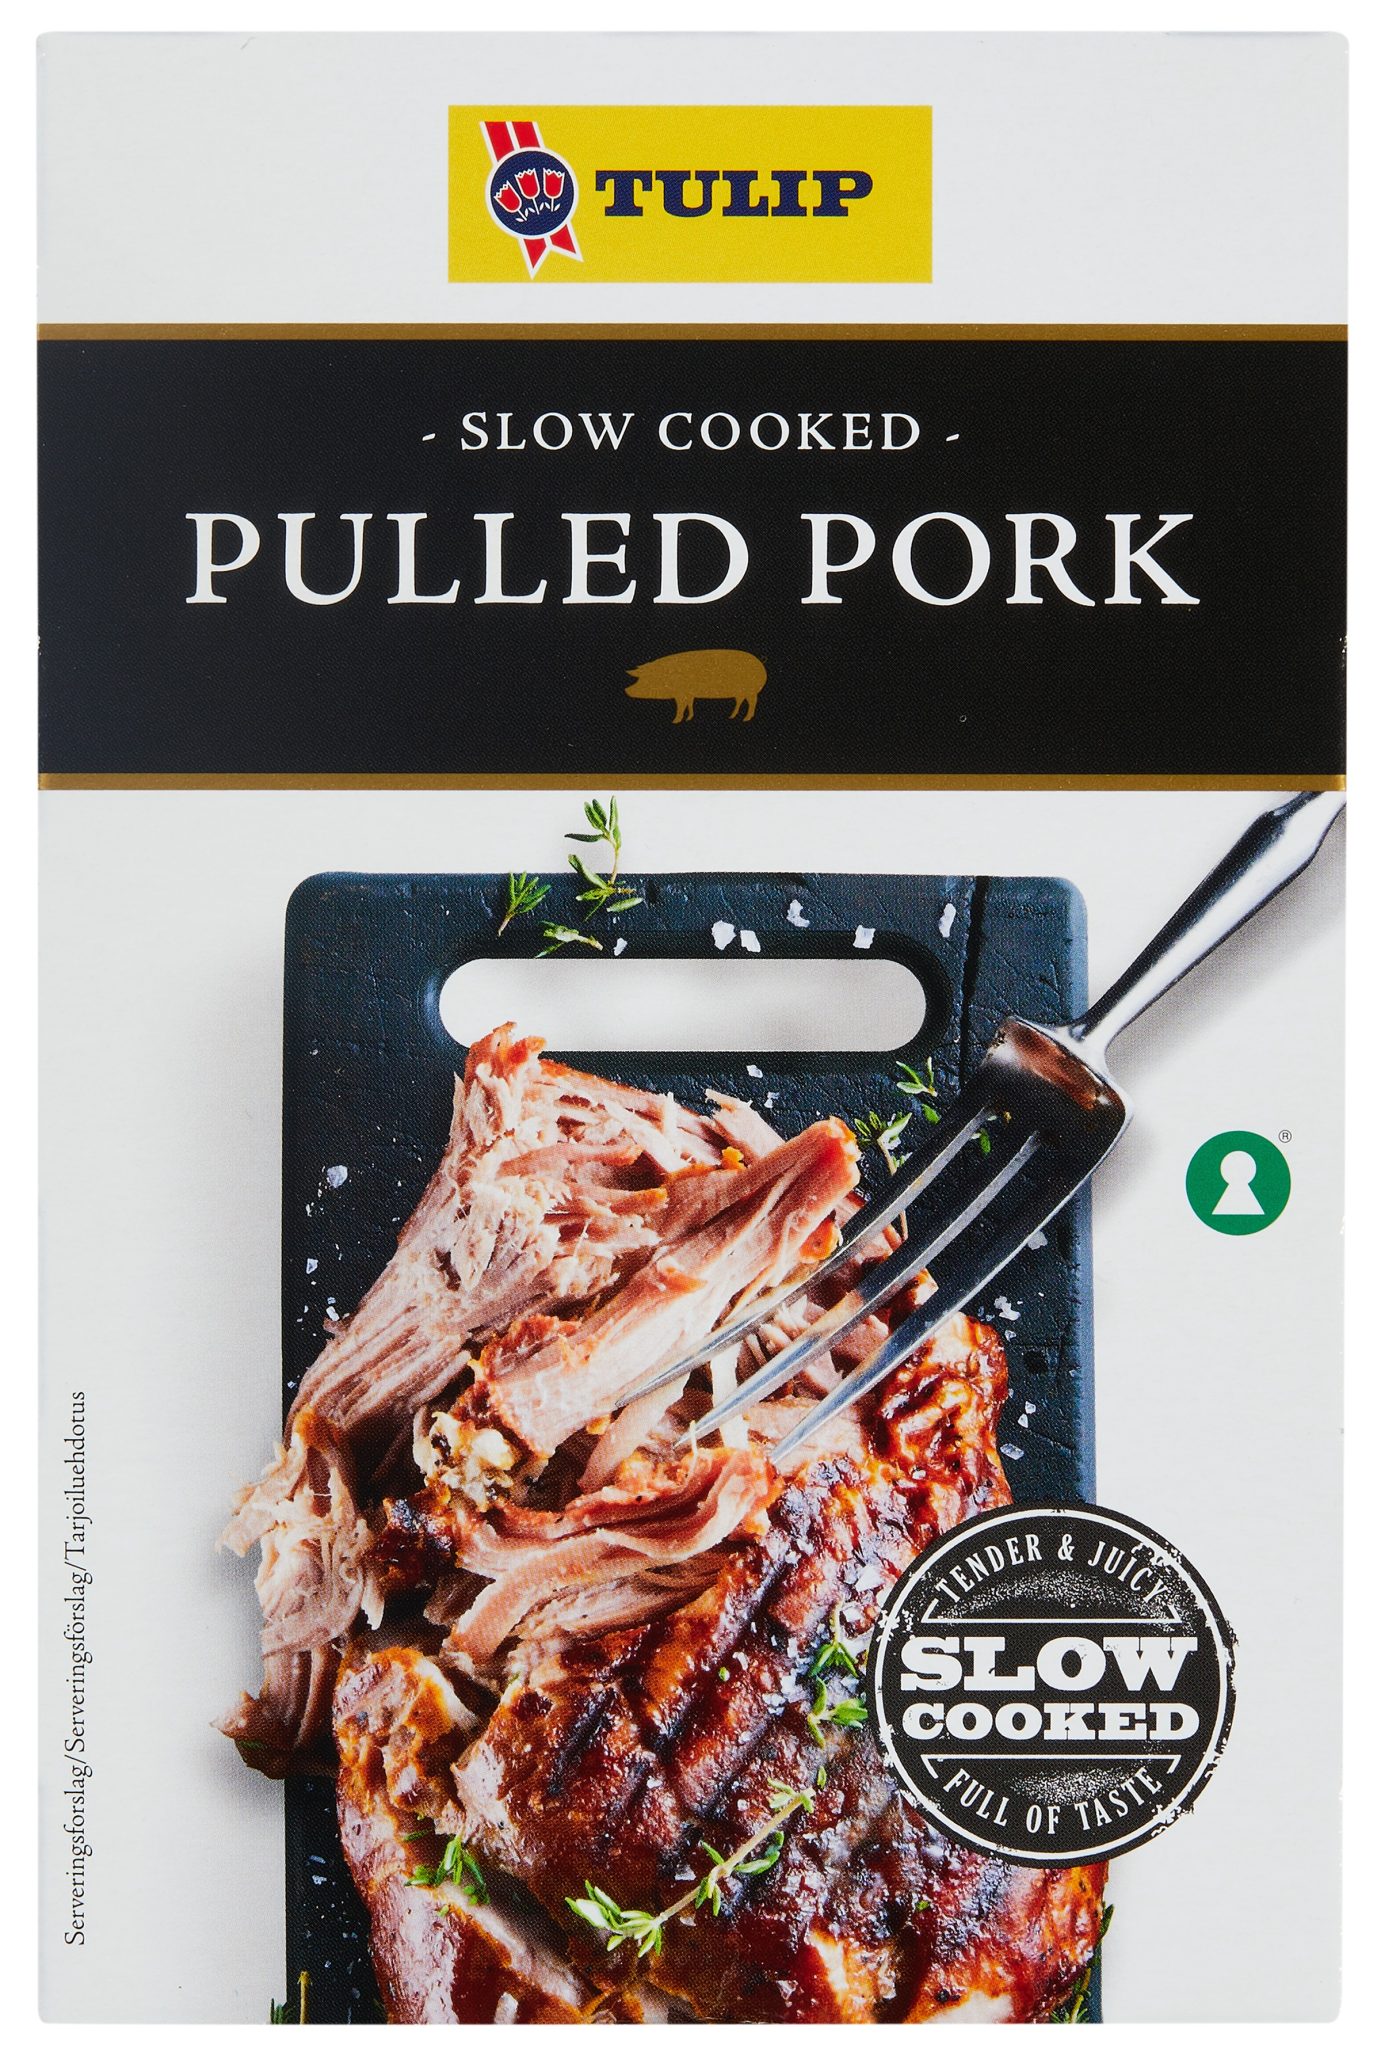 Tulip Pulled Pork Barbeque 8x500g